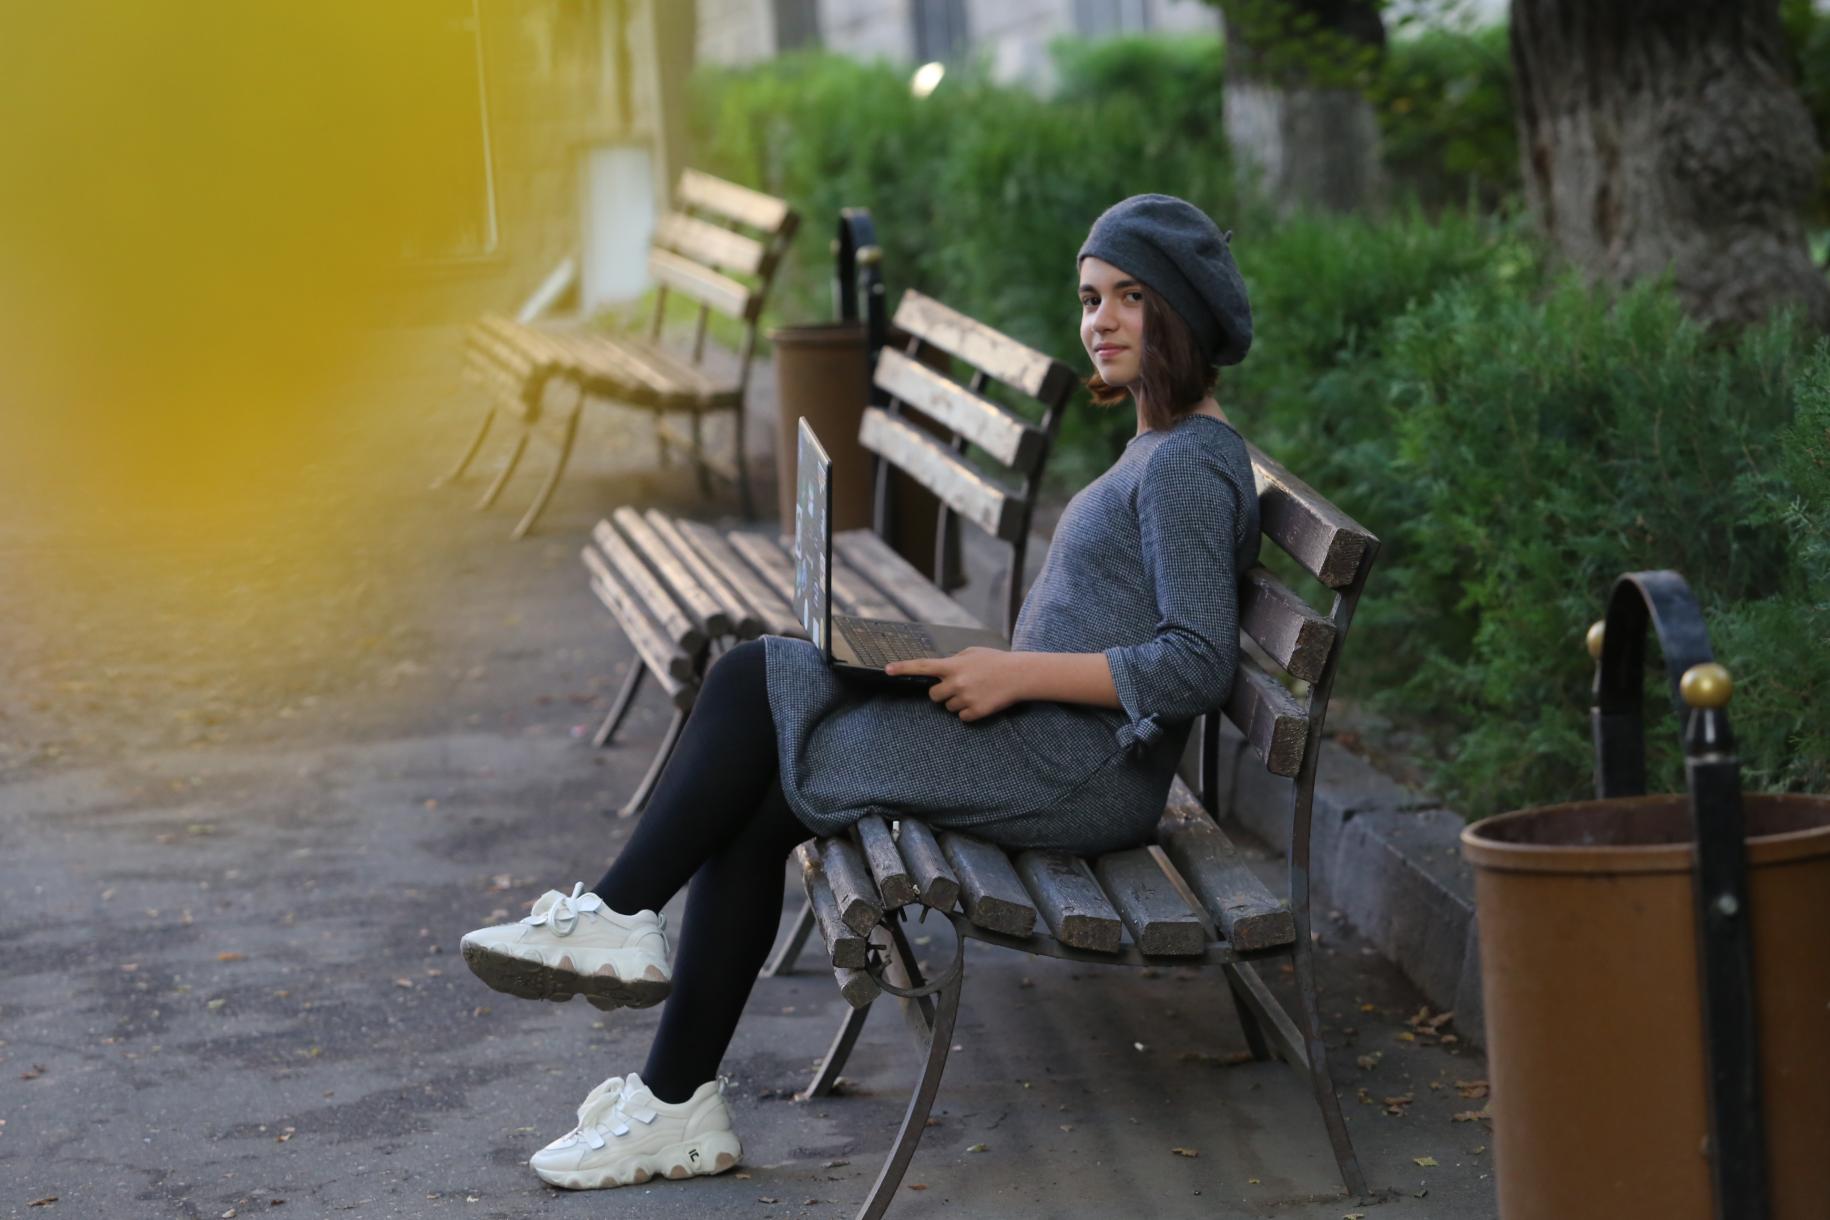 A young woman sitting on a bench in a park with a laptop